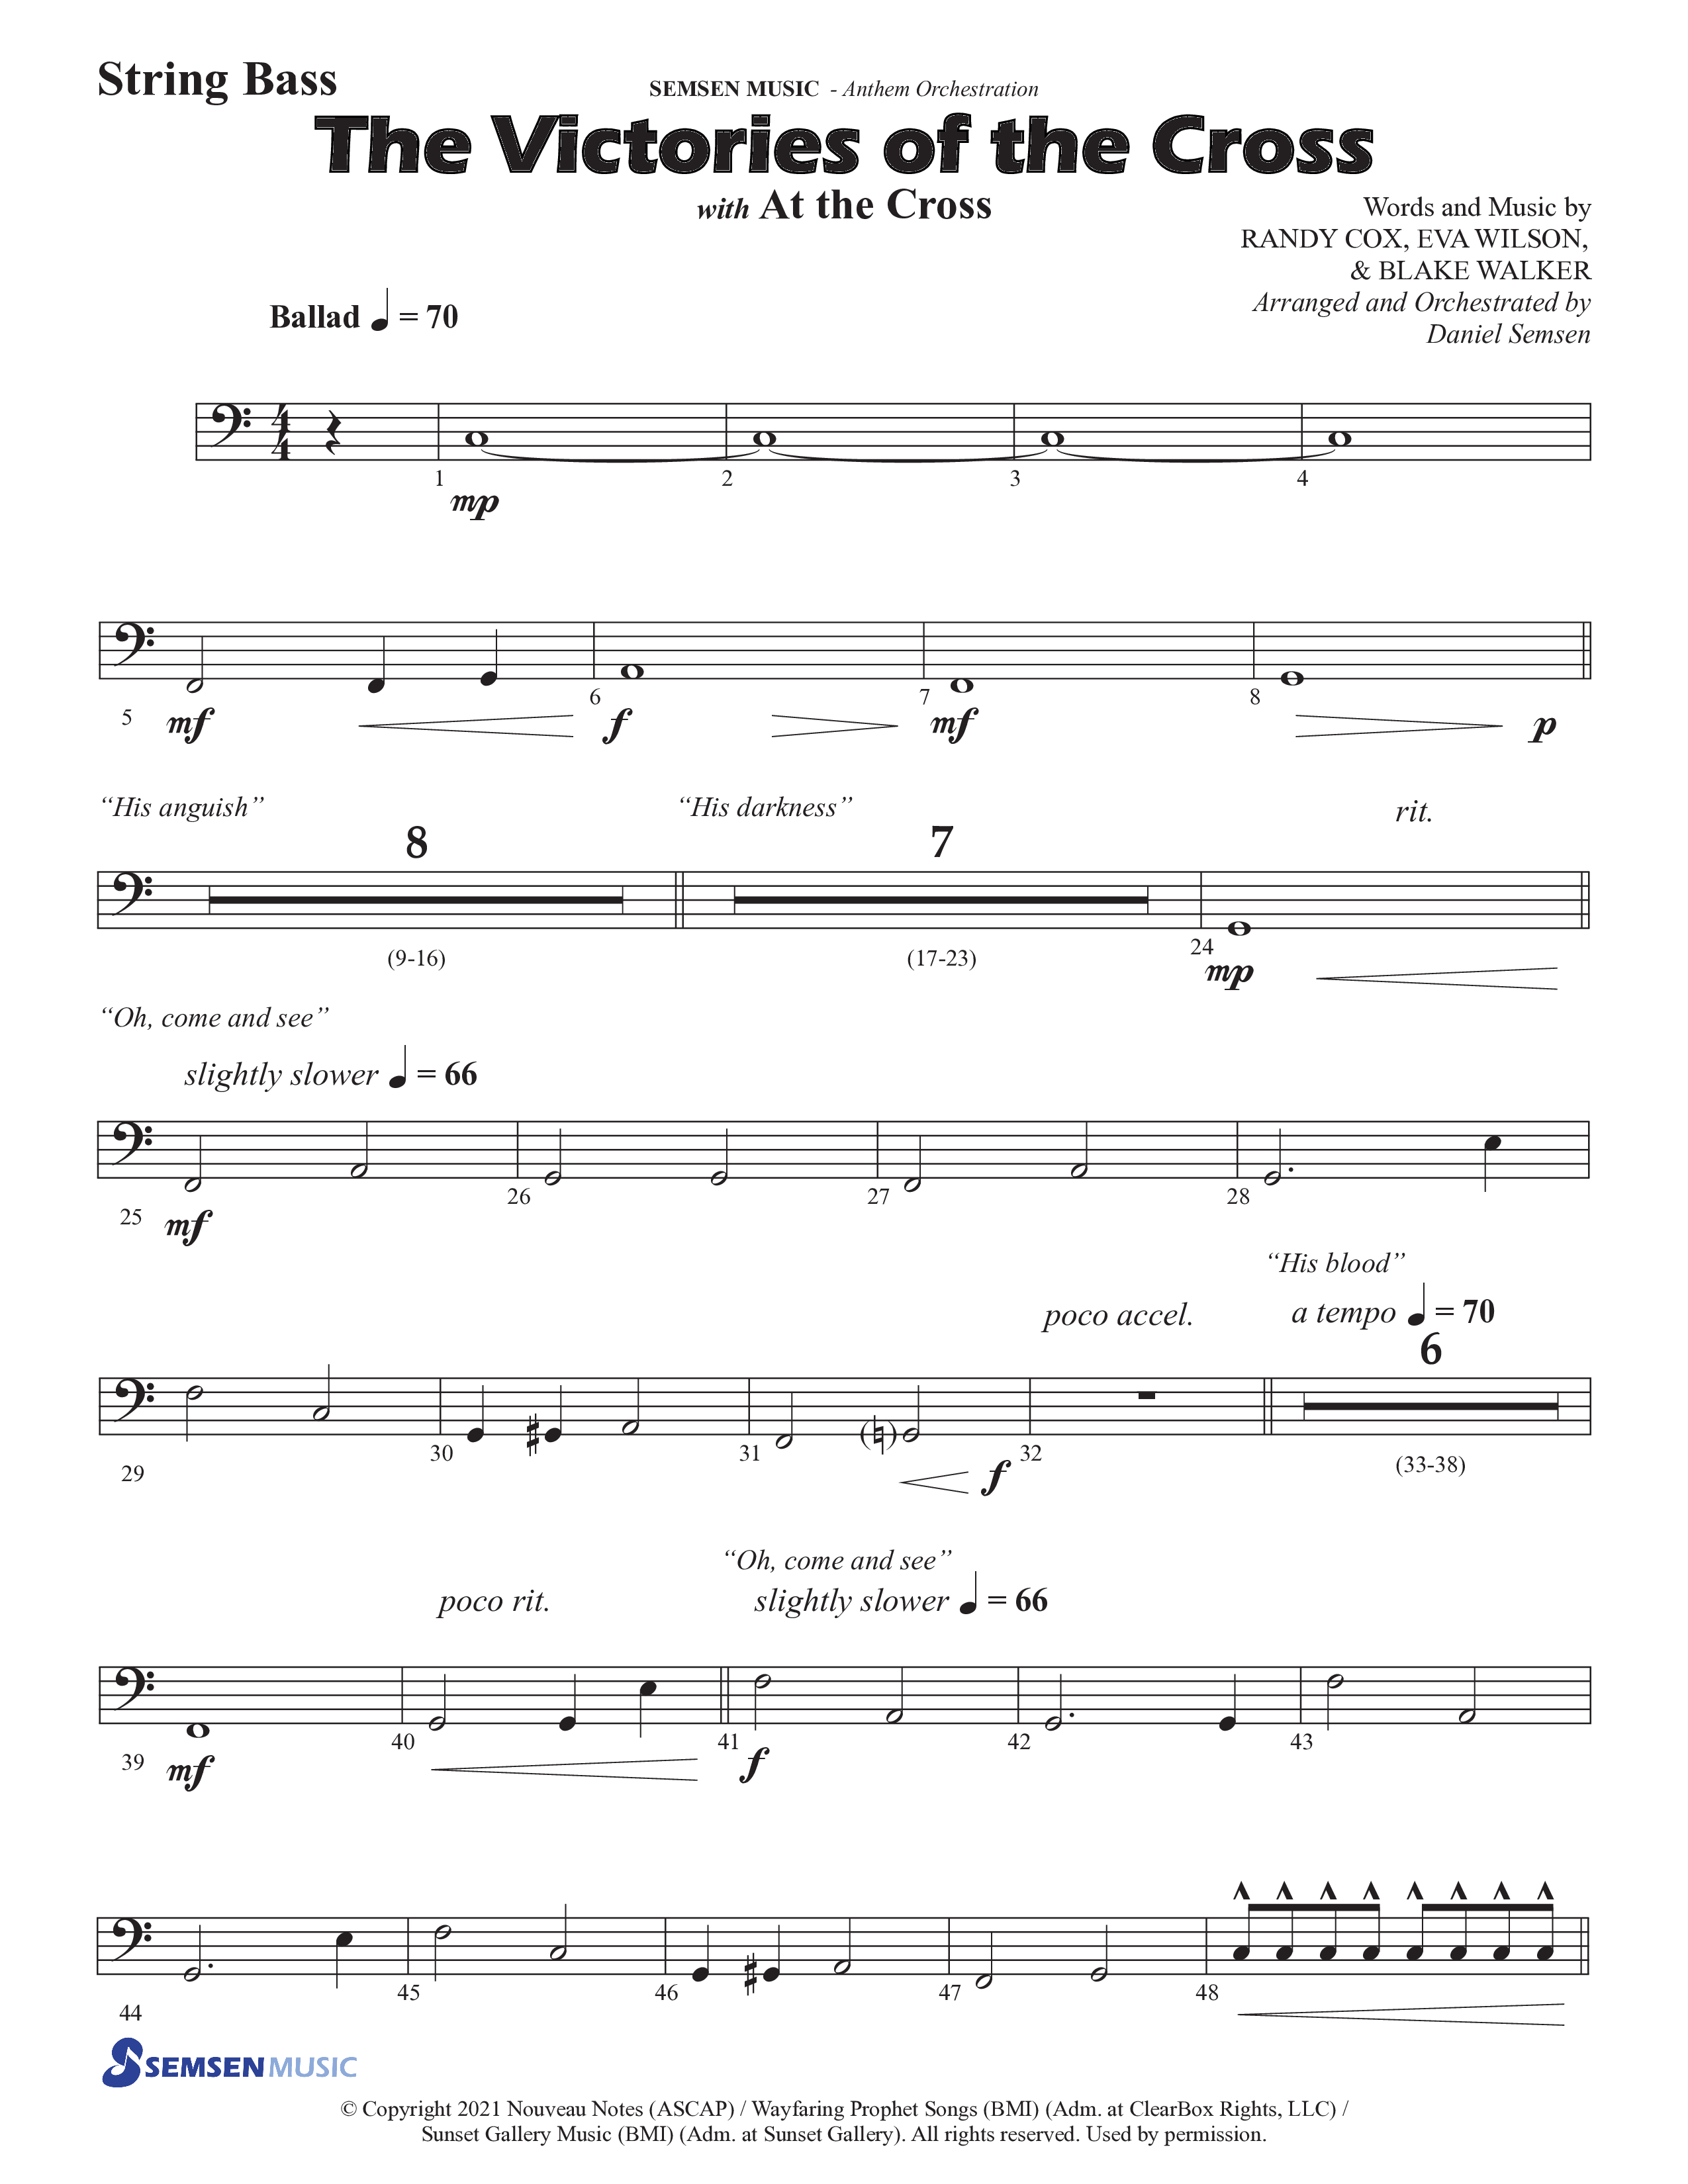 The Victories Of The Cross (with At The Cross) (Choral Anthem SATB) String Bass (Semsen Music / Arr. Daniel Semsen)